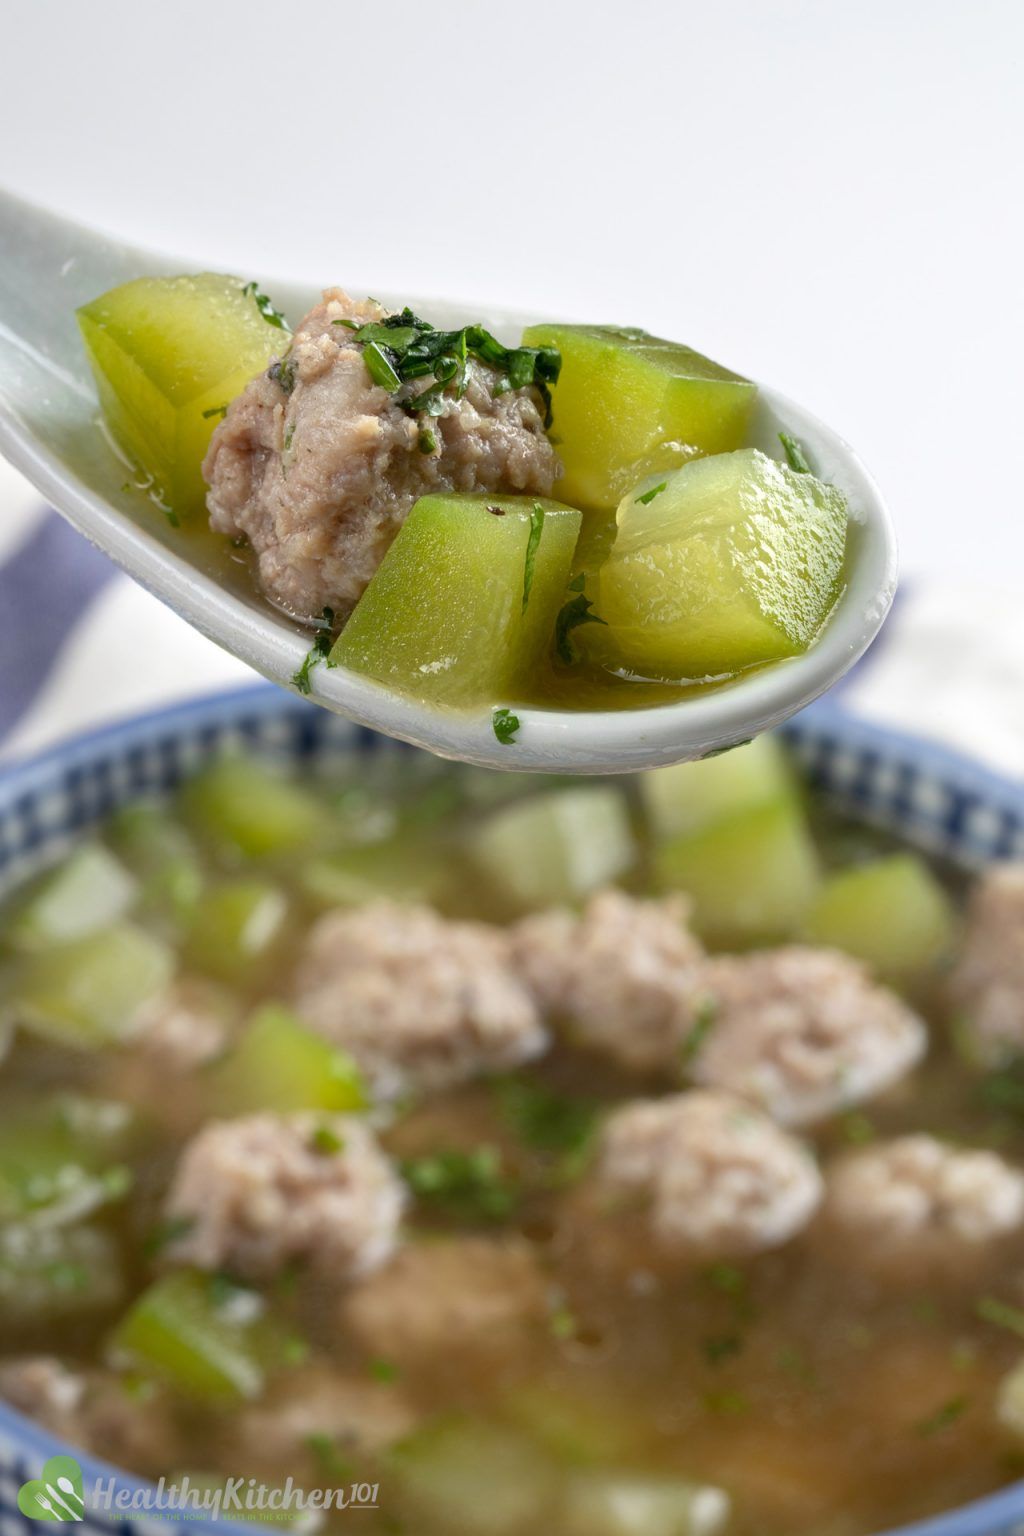 Winter Melon Meatball Soup Recipe - A Healthy Chinese Comfort Food